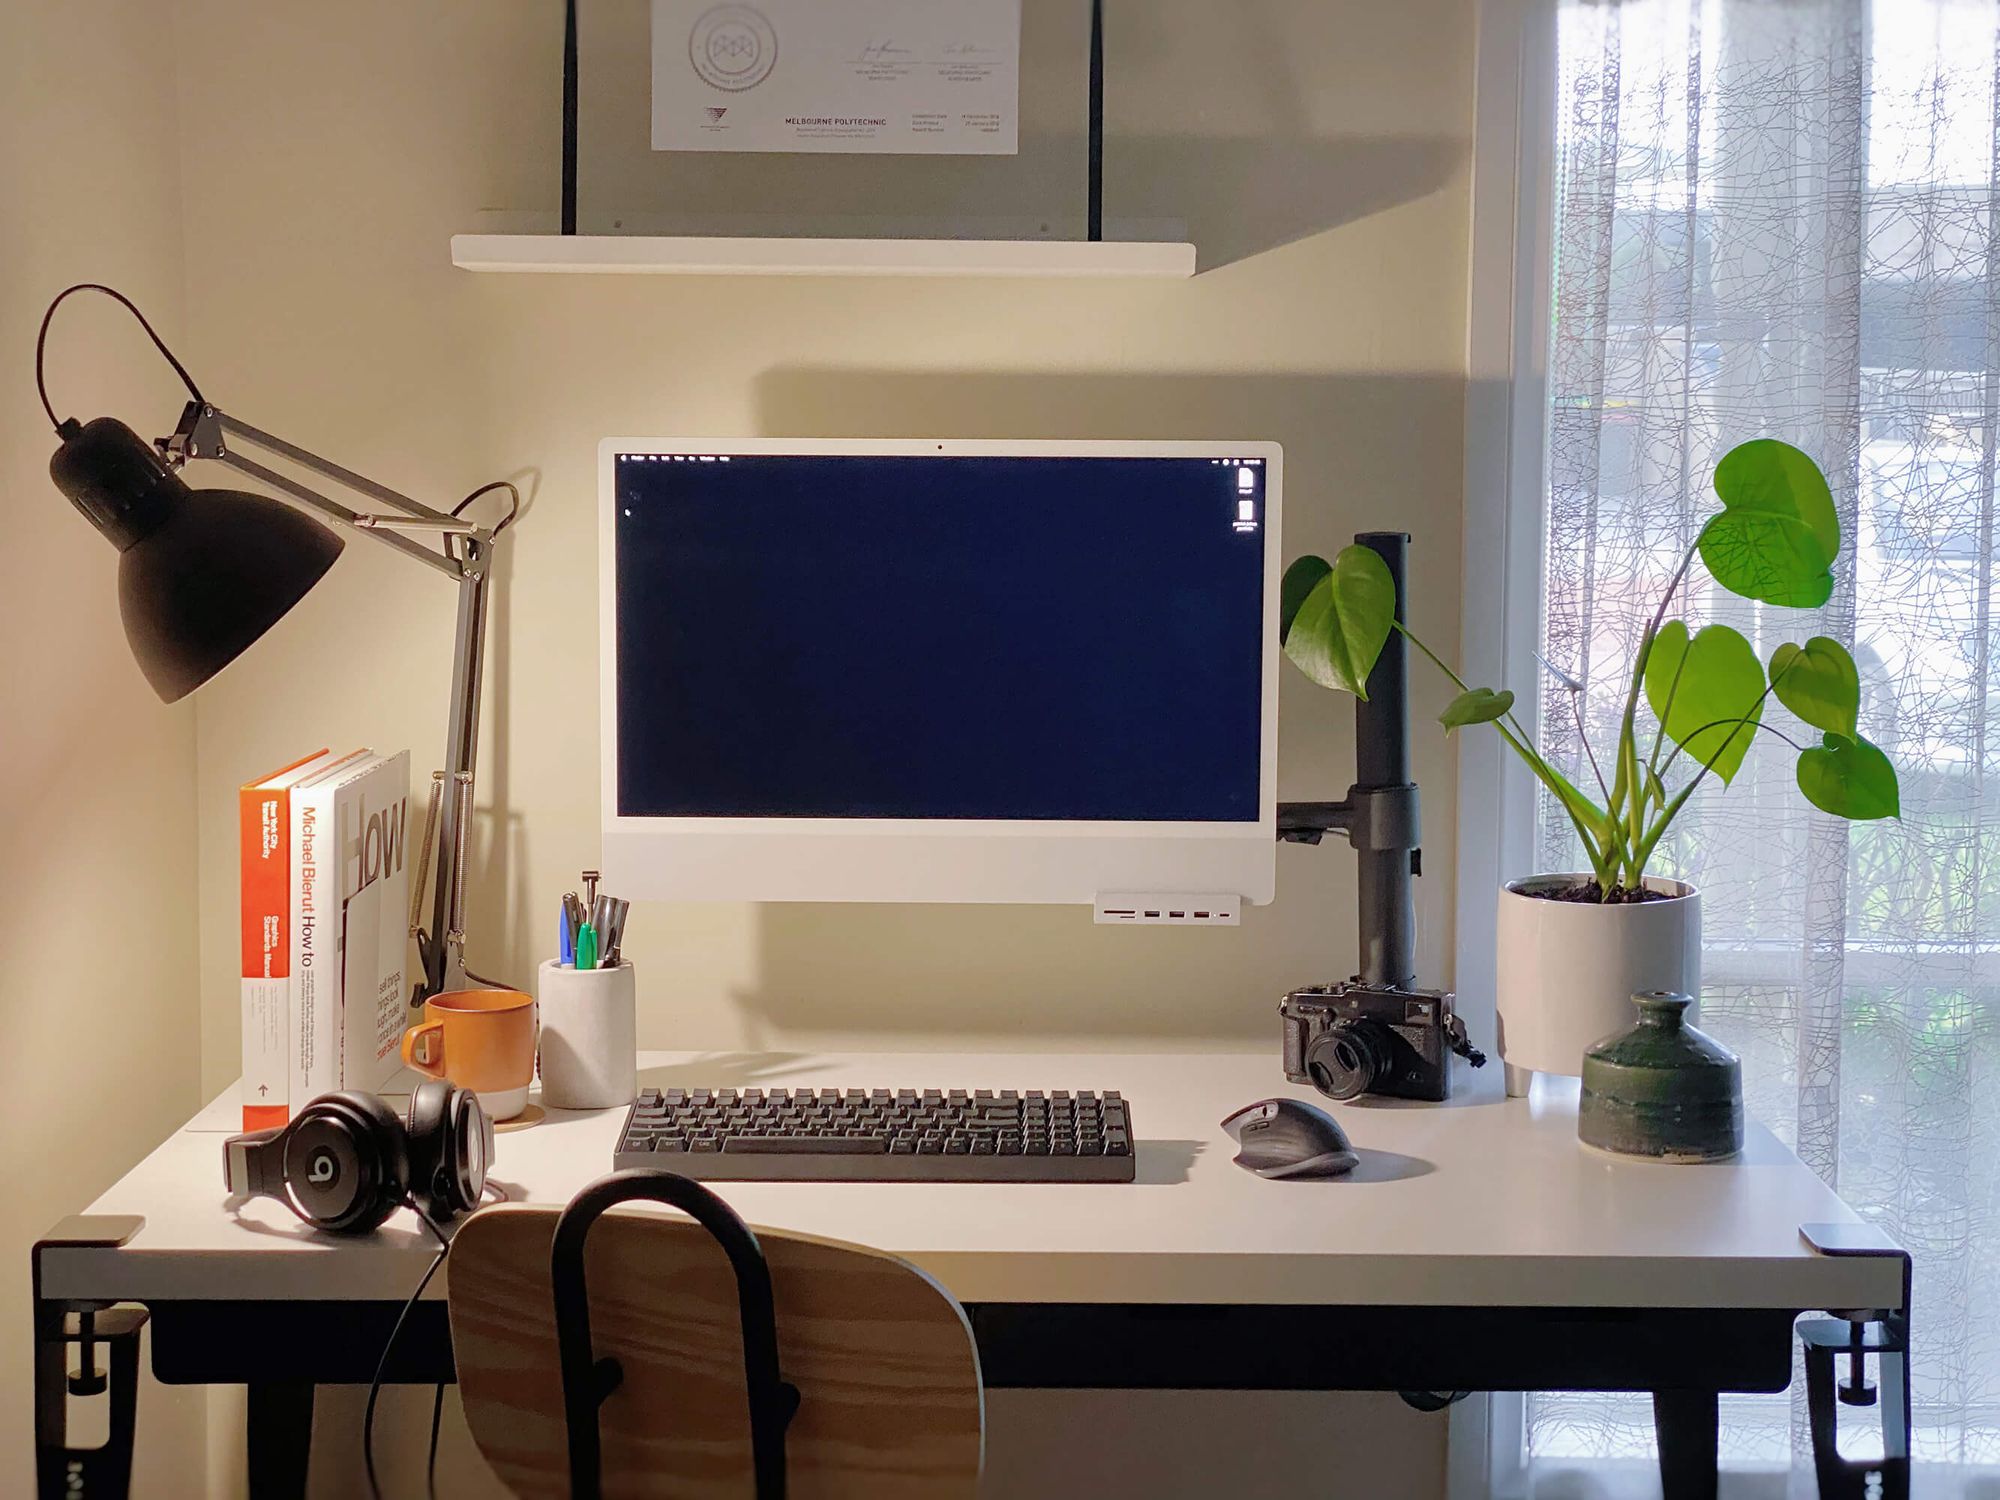 A minimalist home office setup featuring the Tiptoe WAVE drawers unit and IKEA worktop